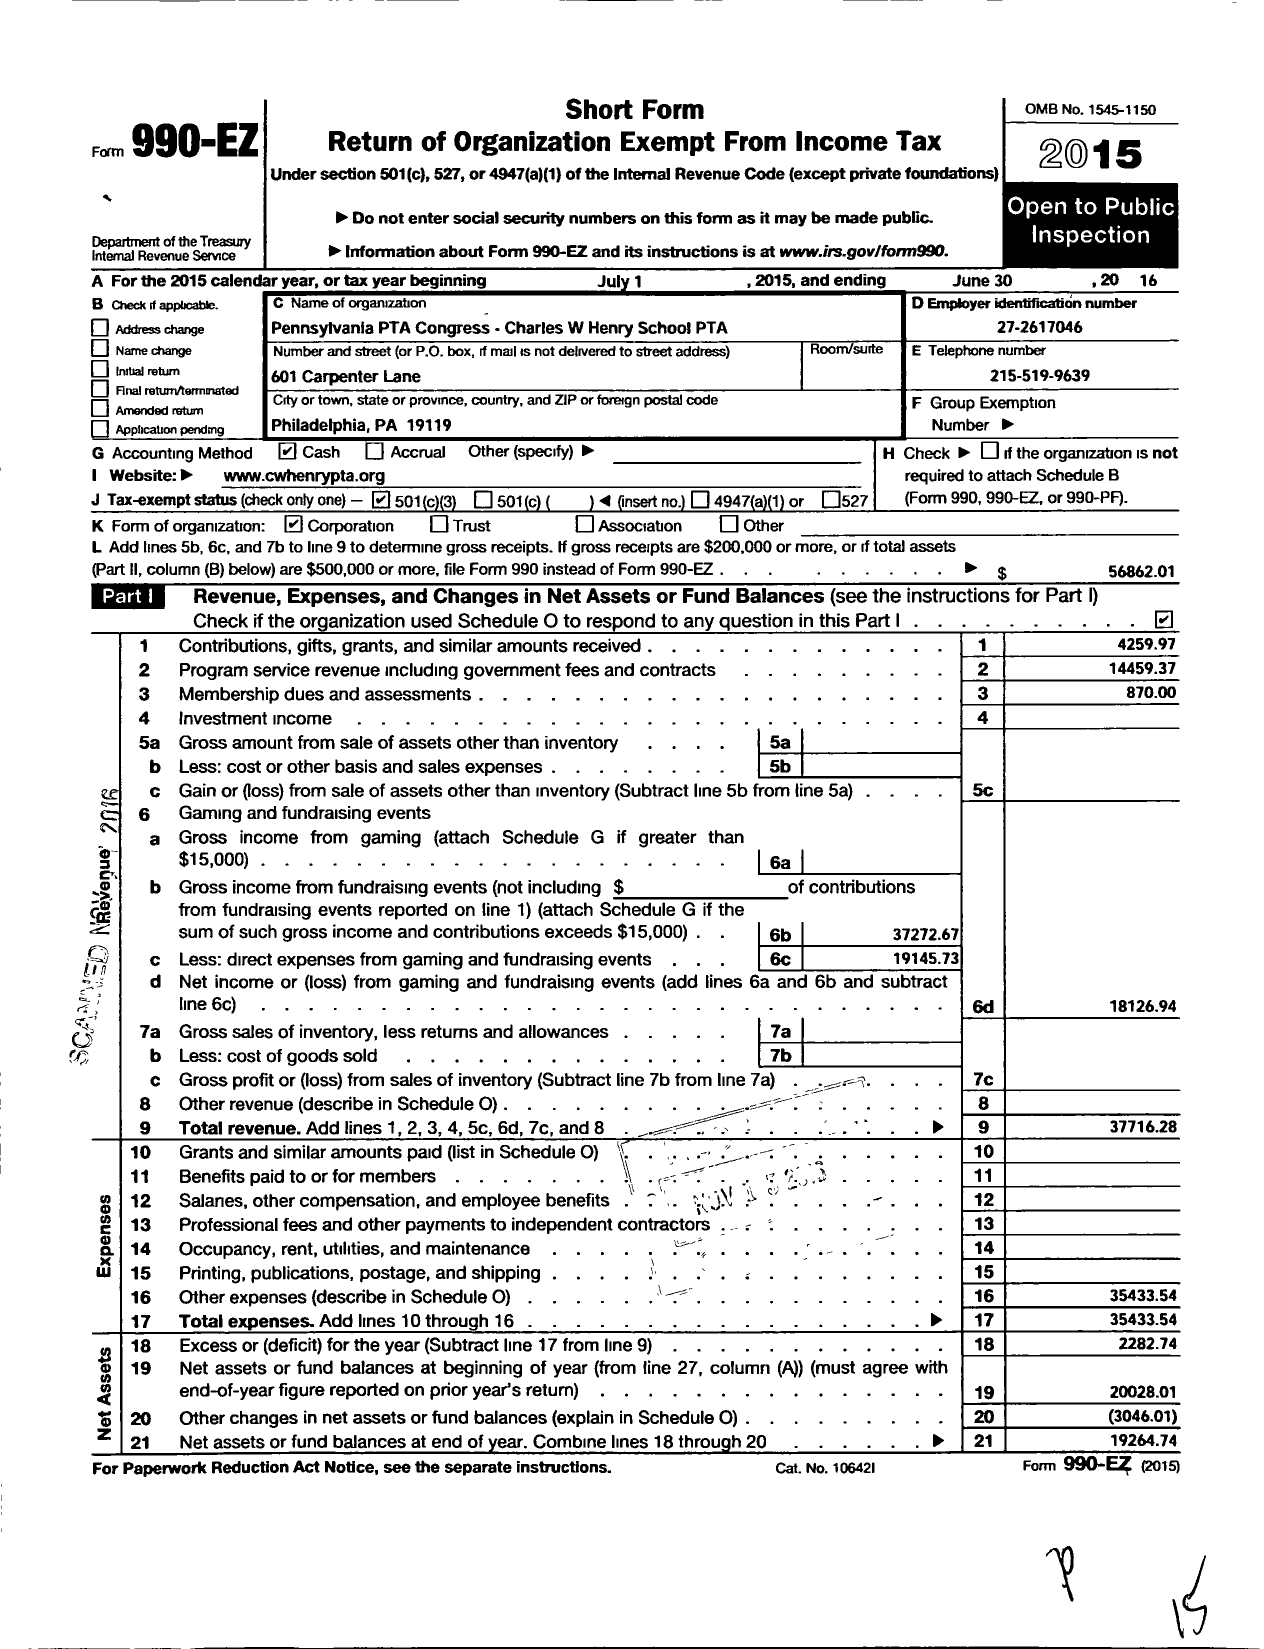 Image of first page of 2015 Form 990EZ for PTA Pennsylvania Congress / C W Henry School PTA